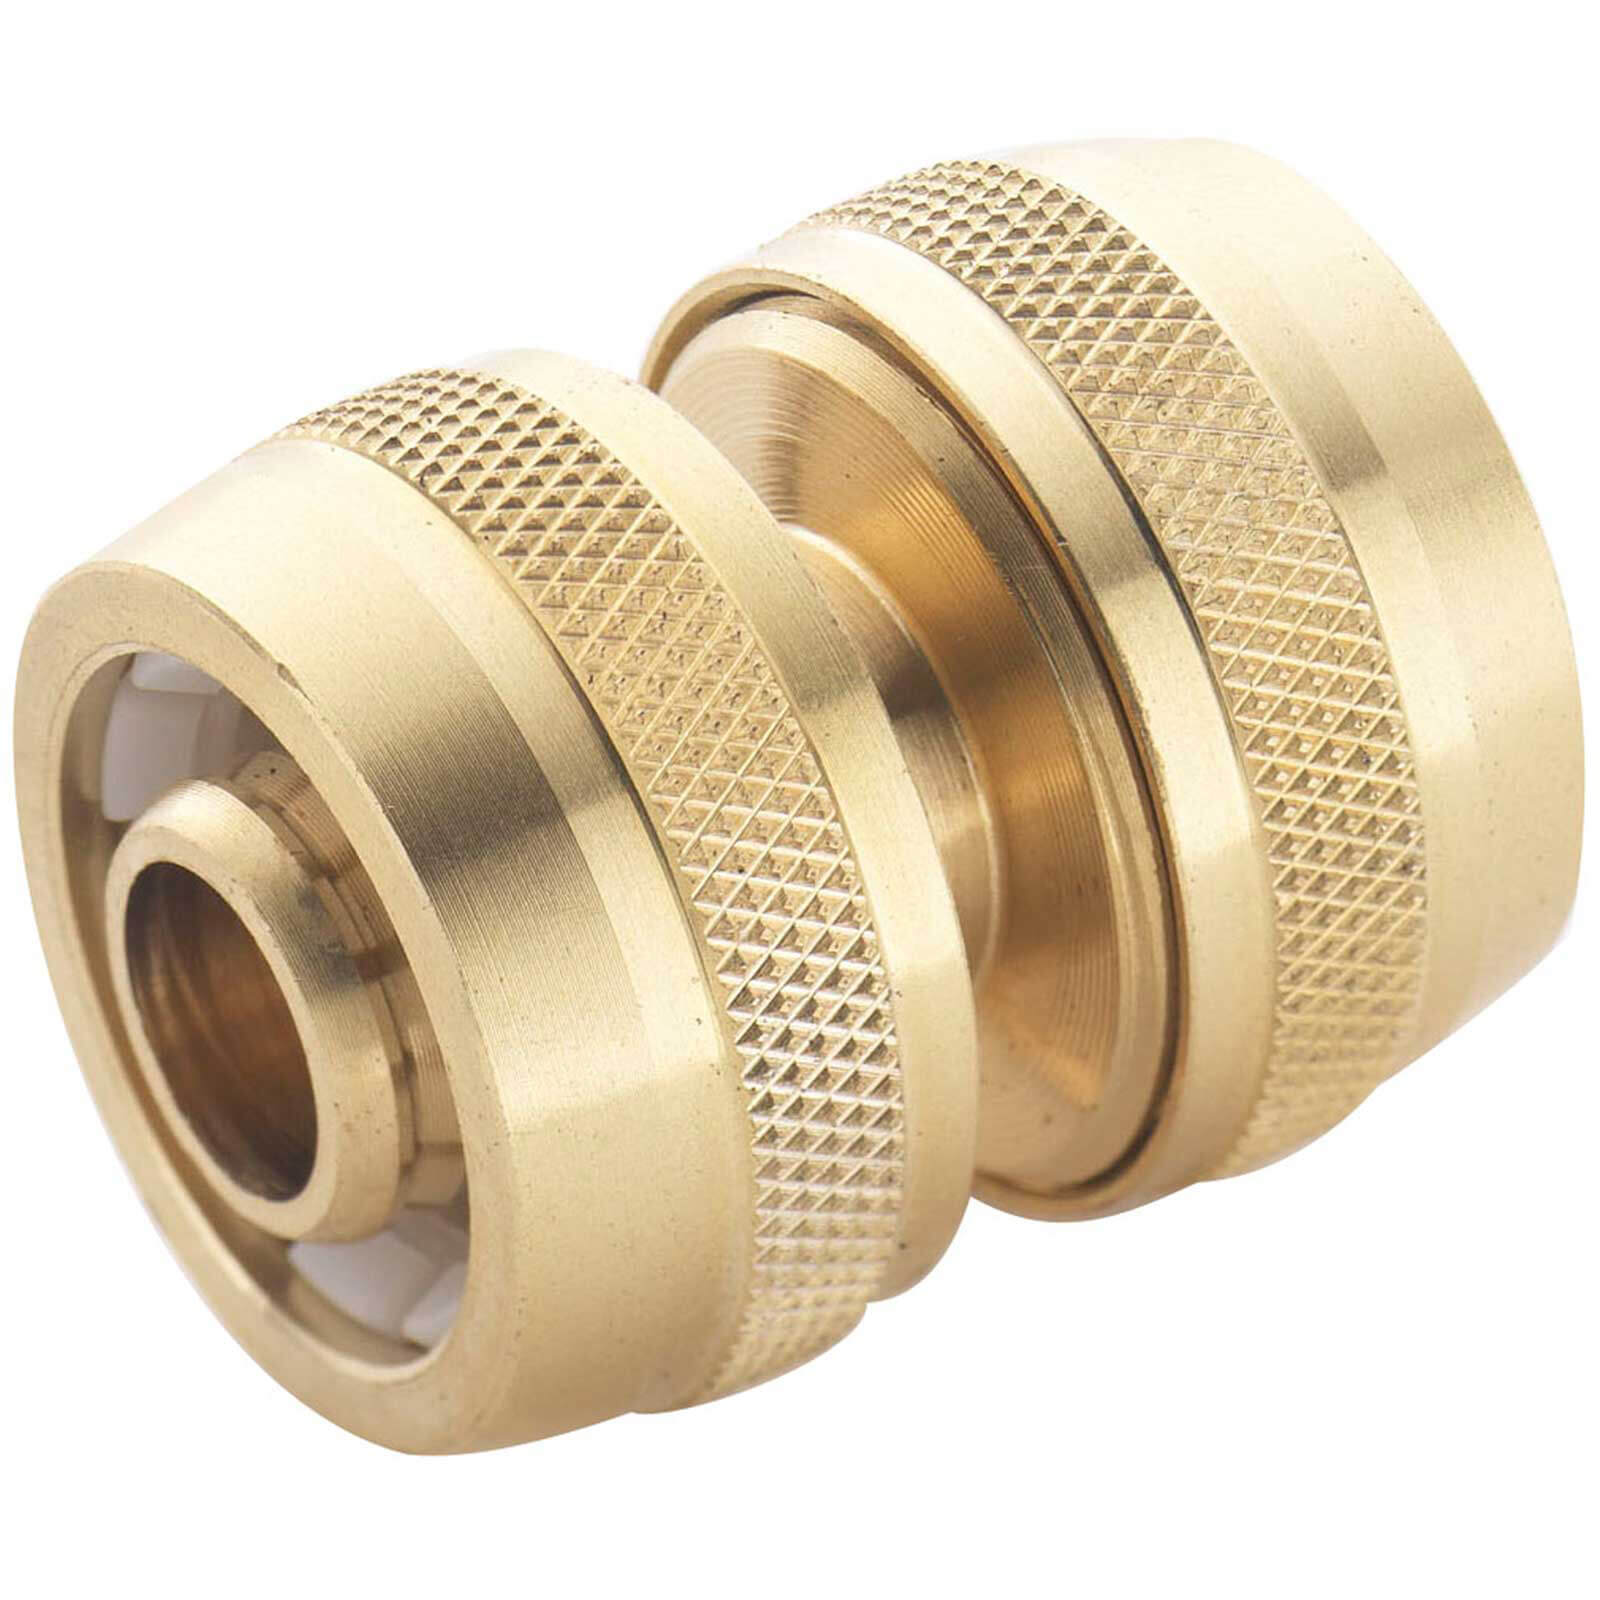 Image of Spear and Jackson Brass Hose Repair Connector 1/2" / 12.5mm Pack of 1